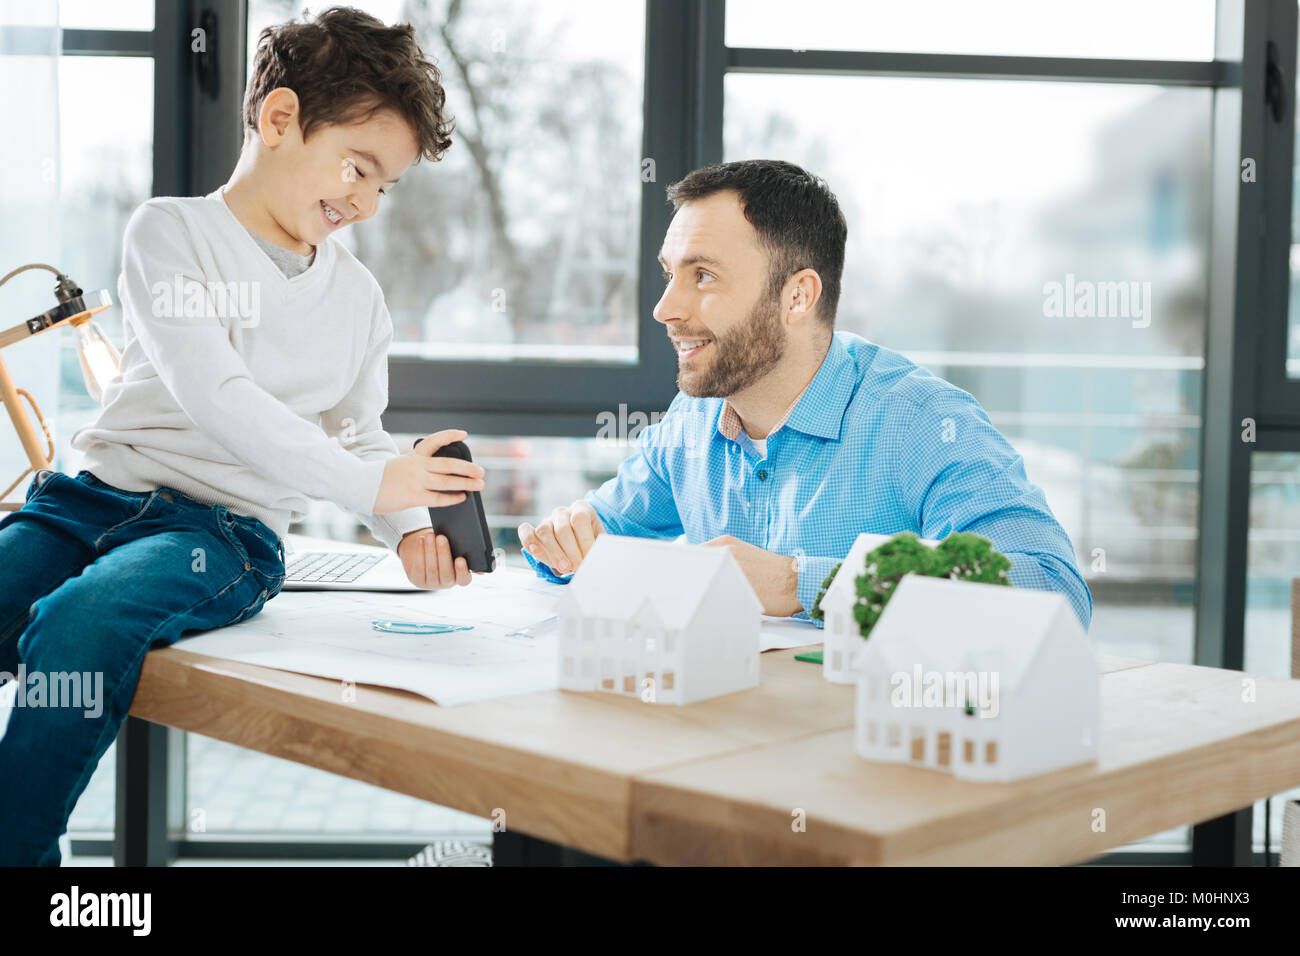 Lively boy showing funny videos to his father at work Stock Photo